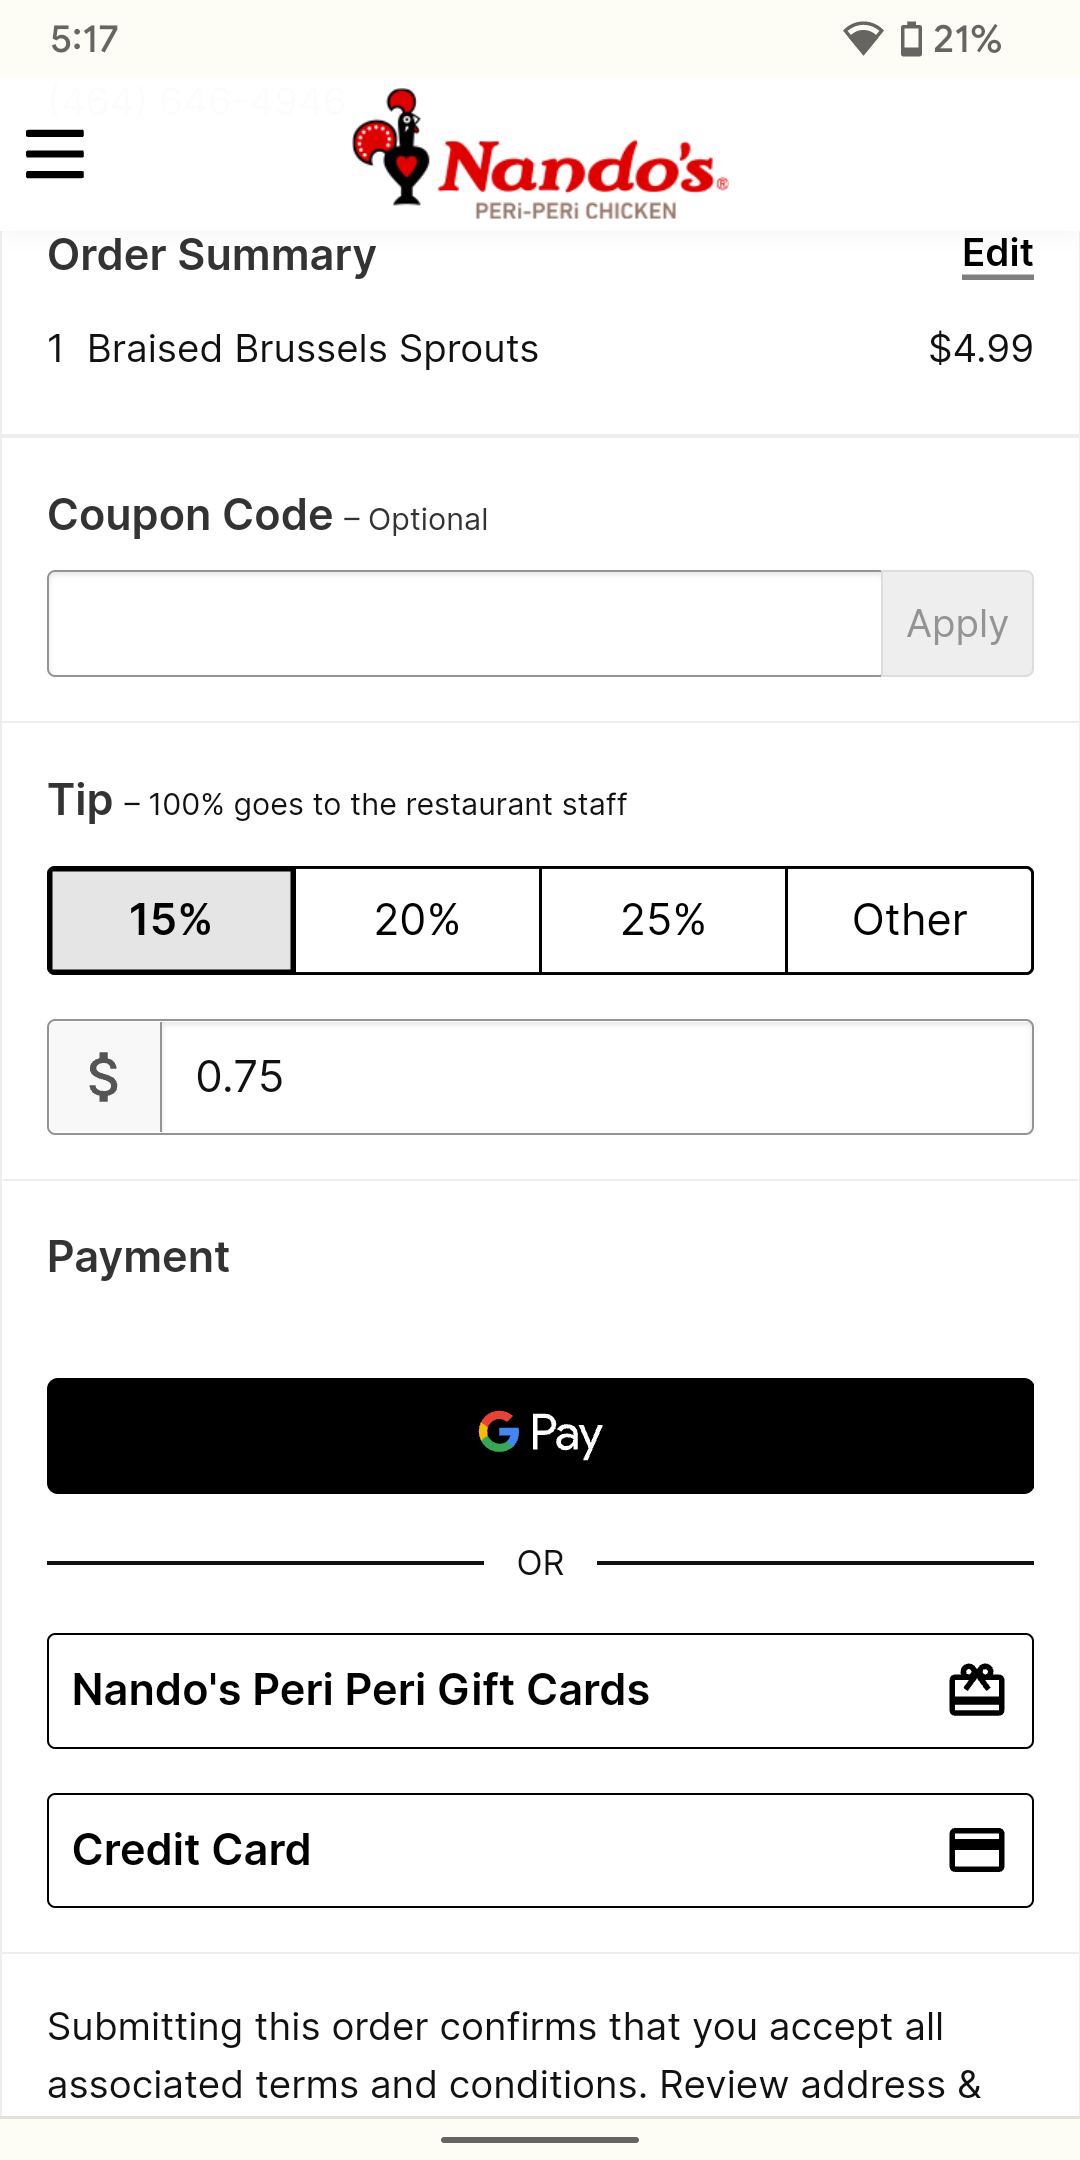 Nando's accepts Google Pay on its website.